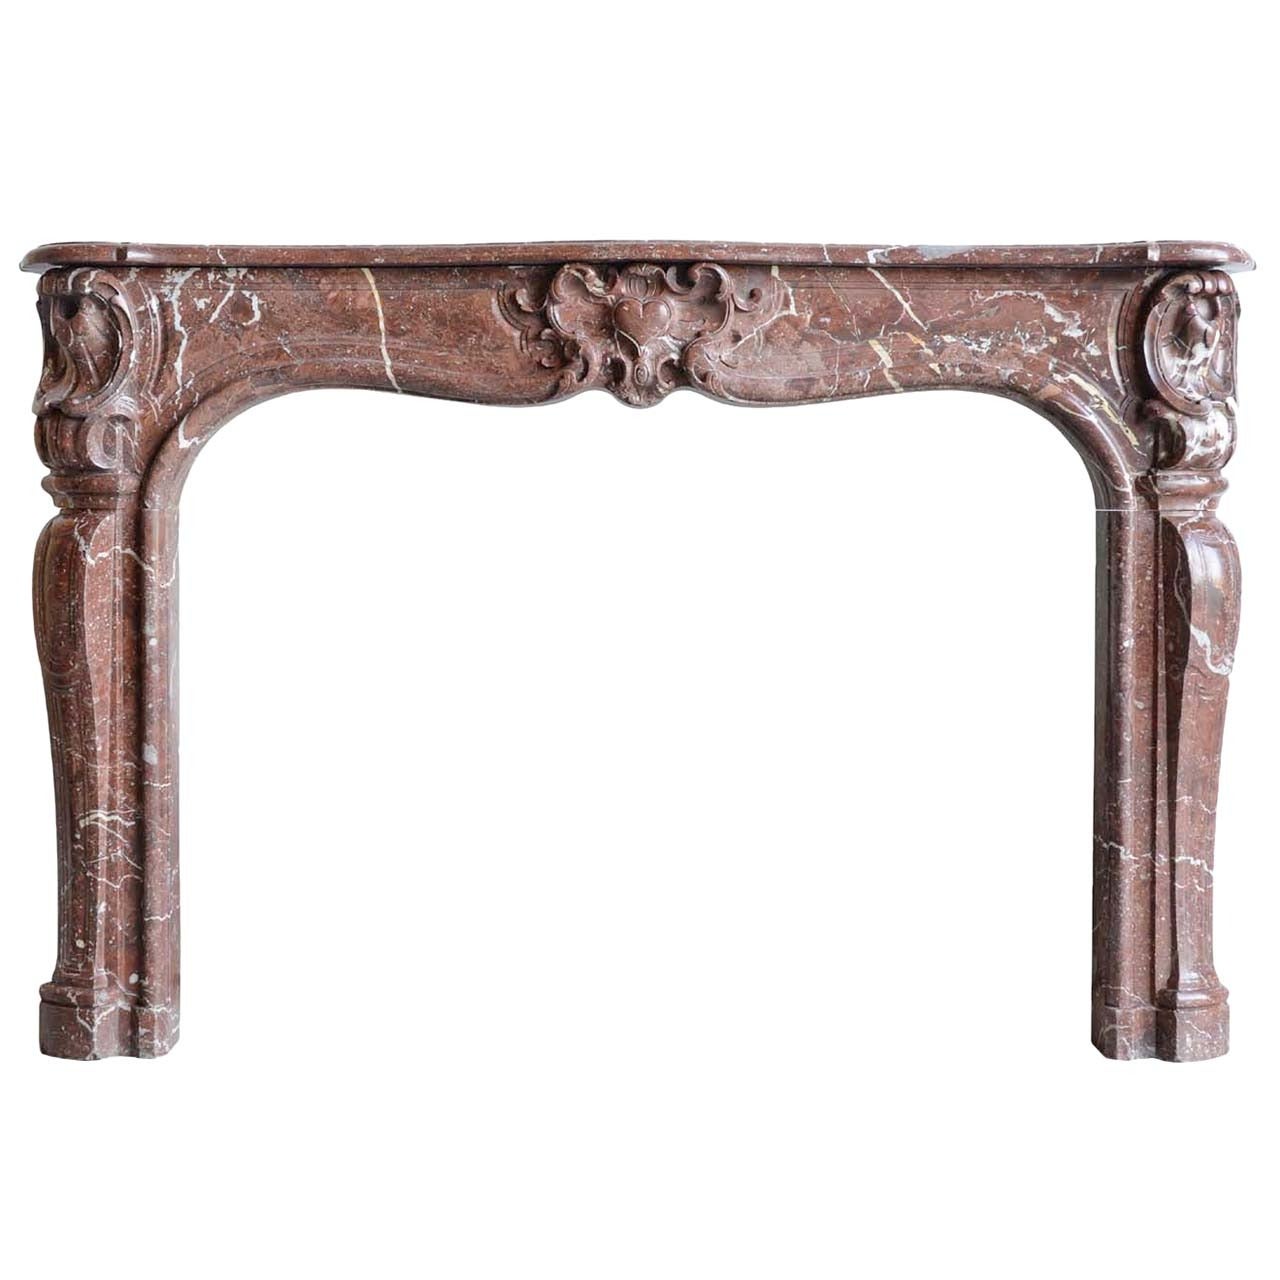 French Louis XV Period Red Marble Fireplace, 18th Century For Sale